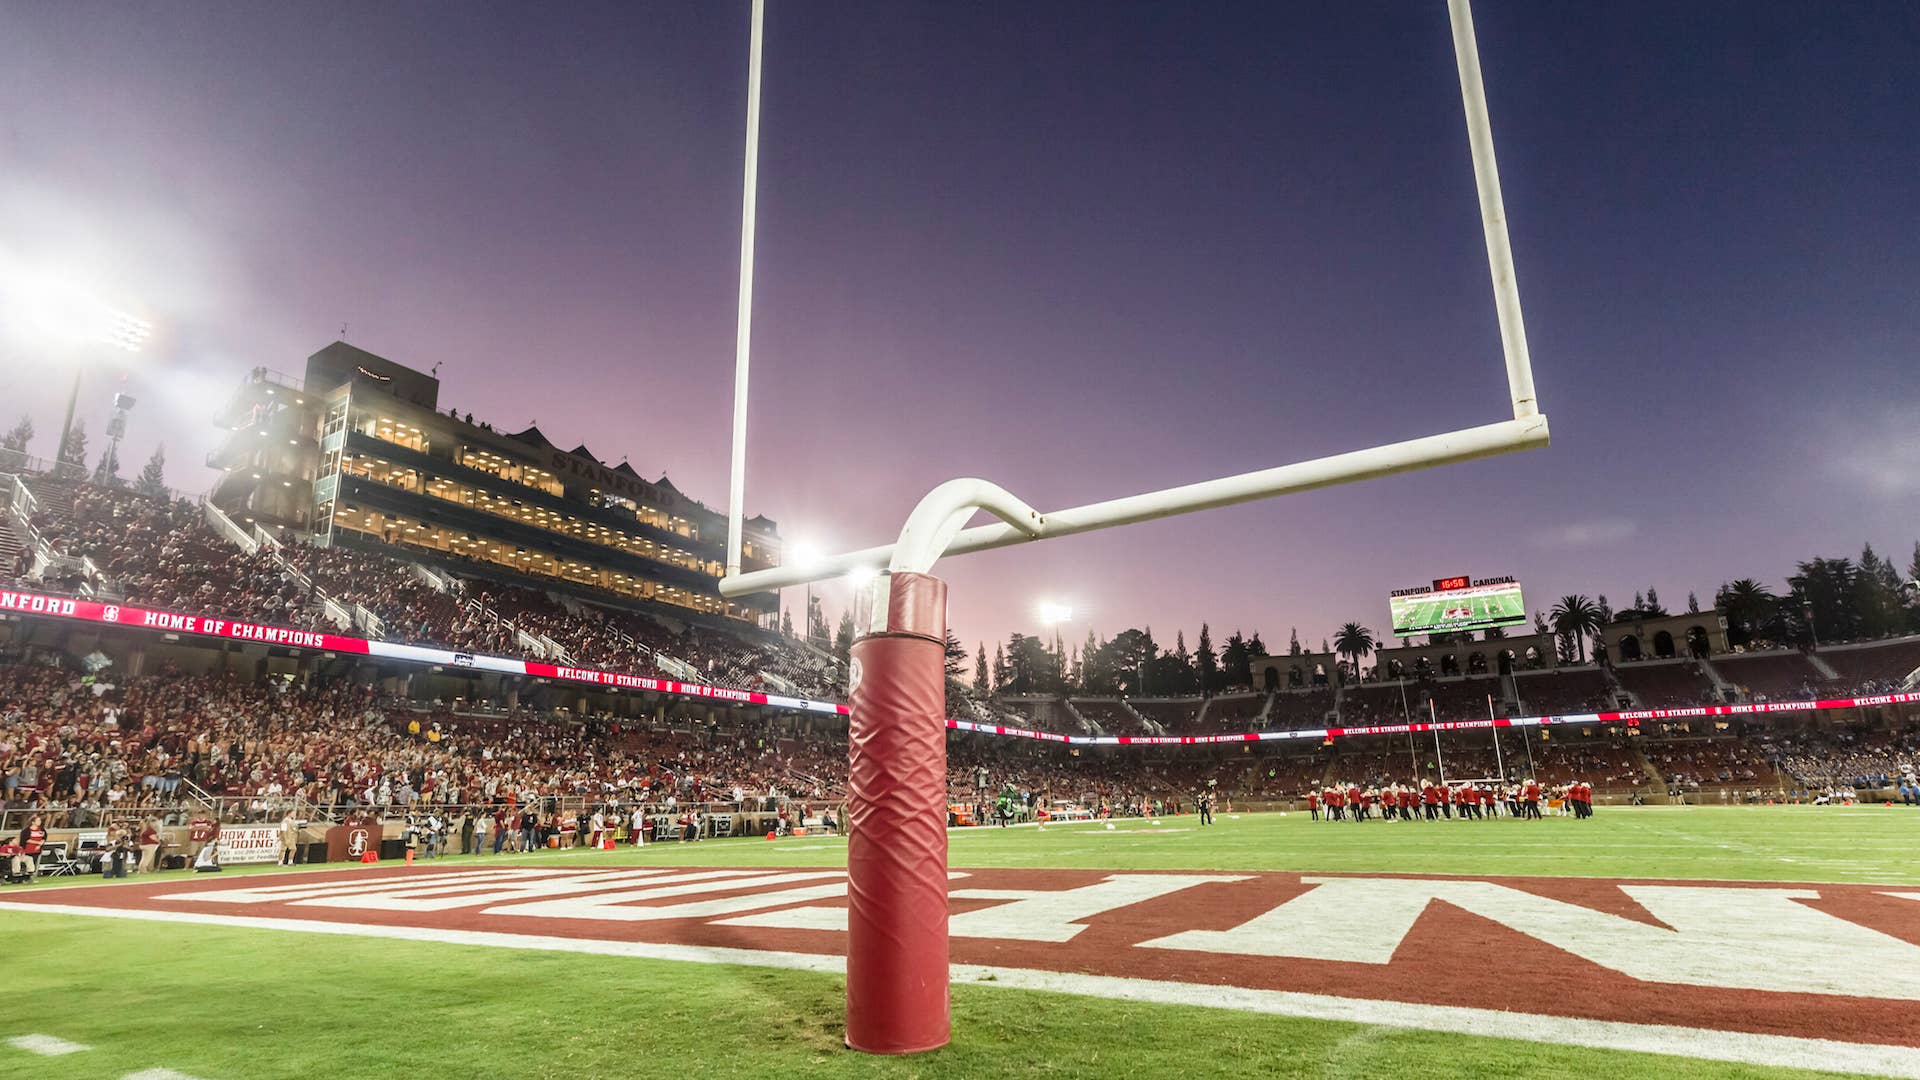 A general view of Stanford Stadium and goal